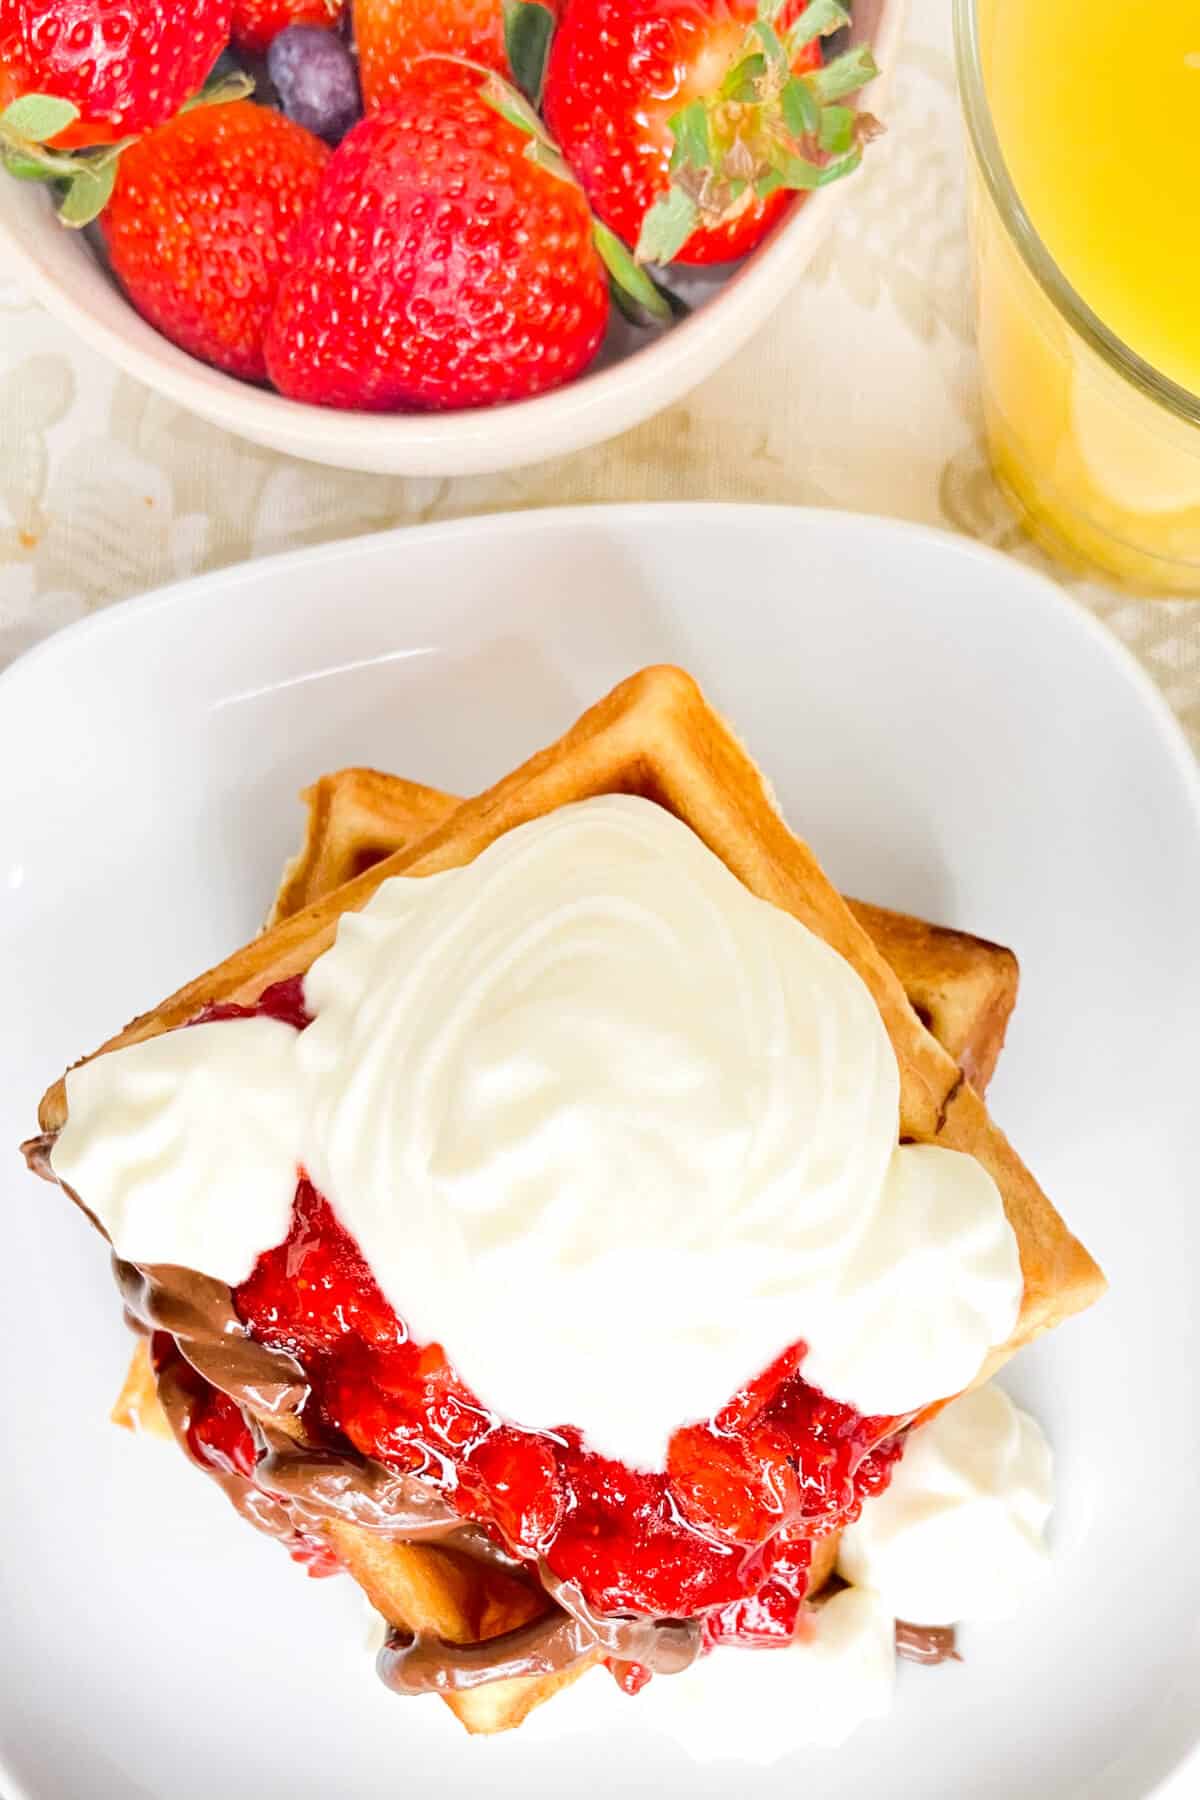 Waffles topped with nutella, strawberries, and whipped cream.